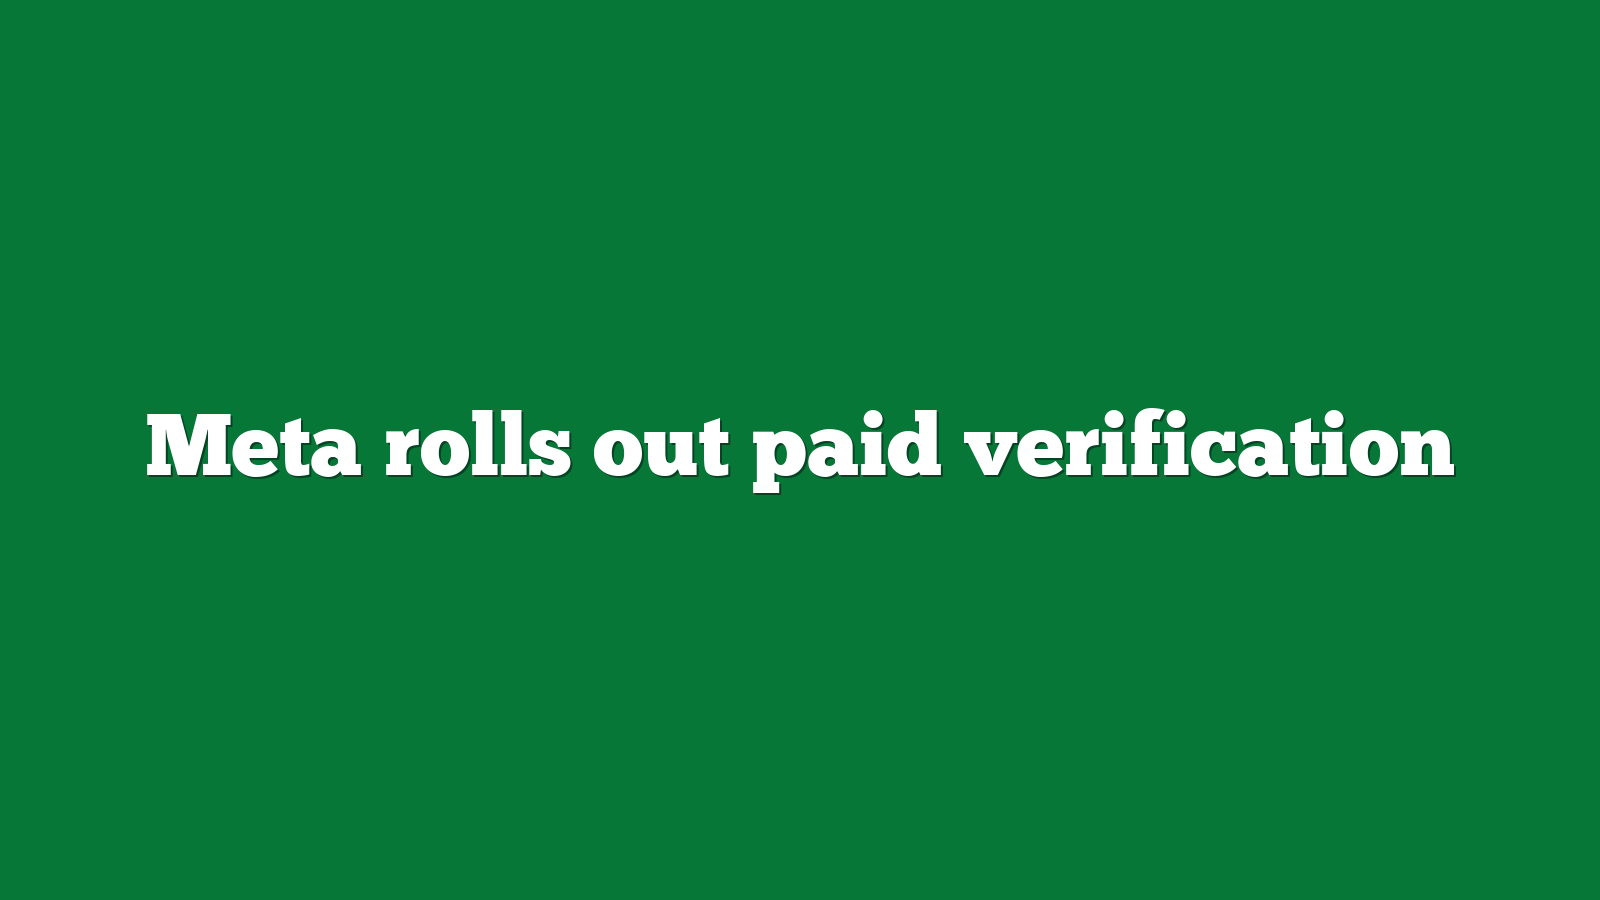 Meta rolls out paid verification